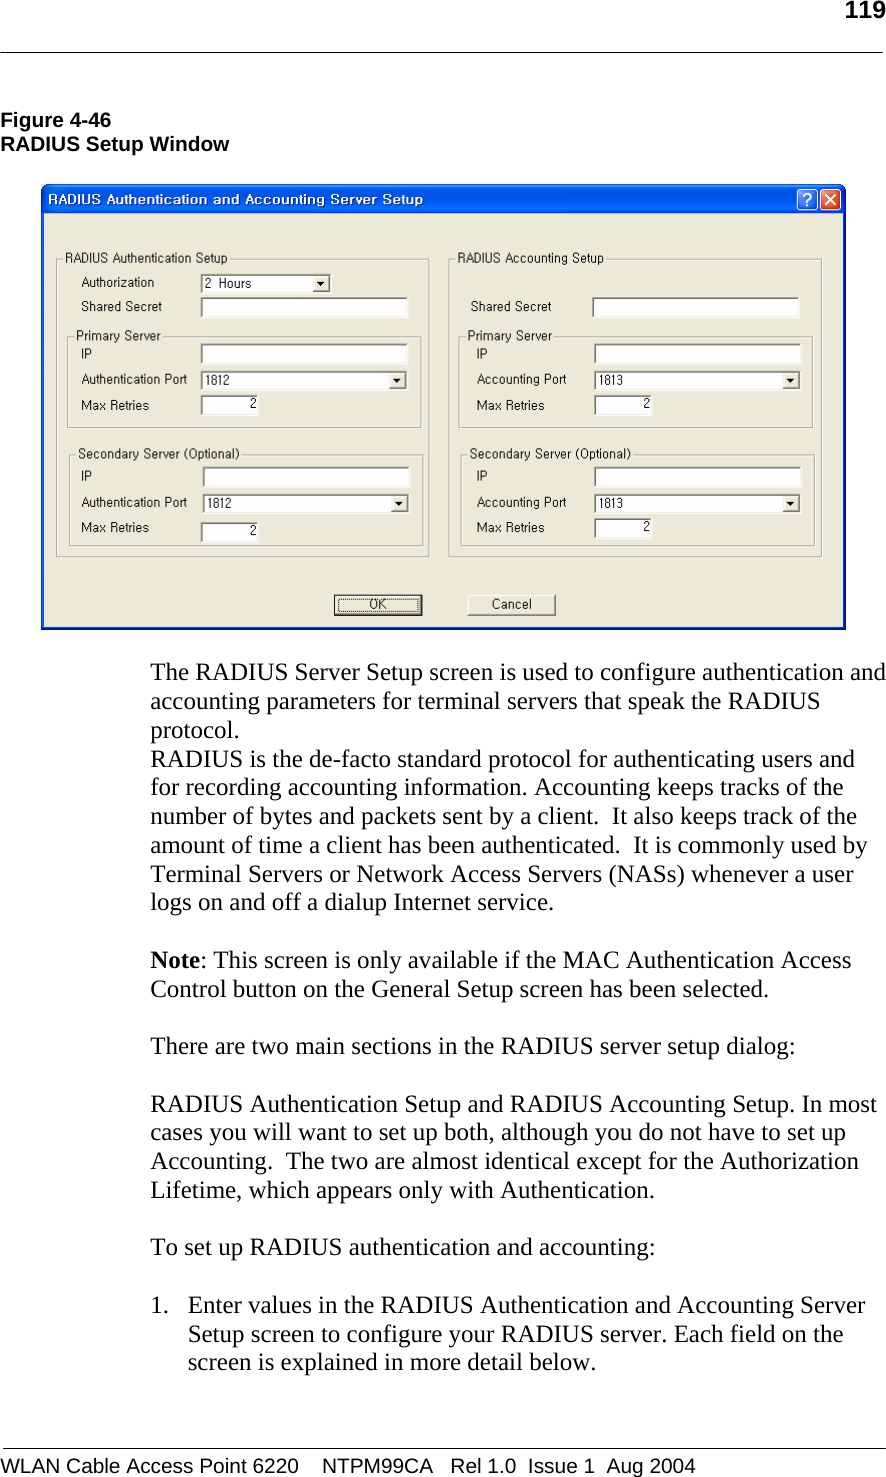   119  Figure 4-46 RADIUS Setup Window    The RADIUS Server Setup screen is used to configure authentication and accounting parameters for terminal servers that speak the RADIUS protocol. RADIUS is the de-facto standard protocol for authenticating users and for recording accounting information. Accounting keeps tracks of the number of bytes and packets sent by a client.  It also keeps track of the amount of time a client has been authenticated.  It is commonly used by Terminal Servers or Network Access Servers (NASs) whenever a user logs on and off a dialup Internet service.   Note: This screen is only available if the MAC Authentication Access Control button on the General Setup screen has been selected.  There are two main sections in the RADIUS server setup dialog:    RADIUS Authentication Setup and RADIUS Accounting Setup. In most cases you will want to set up both, although you do not have to set up Accounting.  The two are almost identical except for the Authorization Lifetime, which appears only with Authentication.   To set up RADIUS authentication and accounting:  1. Enter values in the RADIUS Authentication and Accounting Server Setup screen to configure your RADIUS server. Each field on the screen is explained in more detail below.  WLAN Cable Access Point 6220    NTPM99CA   Rel 1.0  Issue 1  Aug 2004 